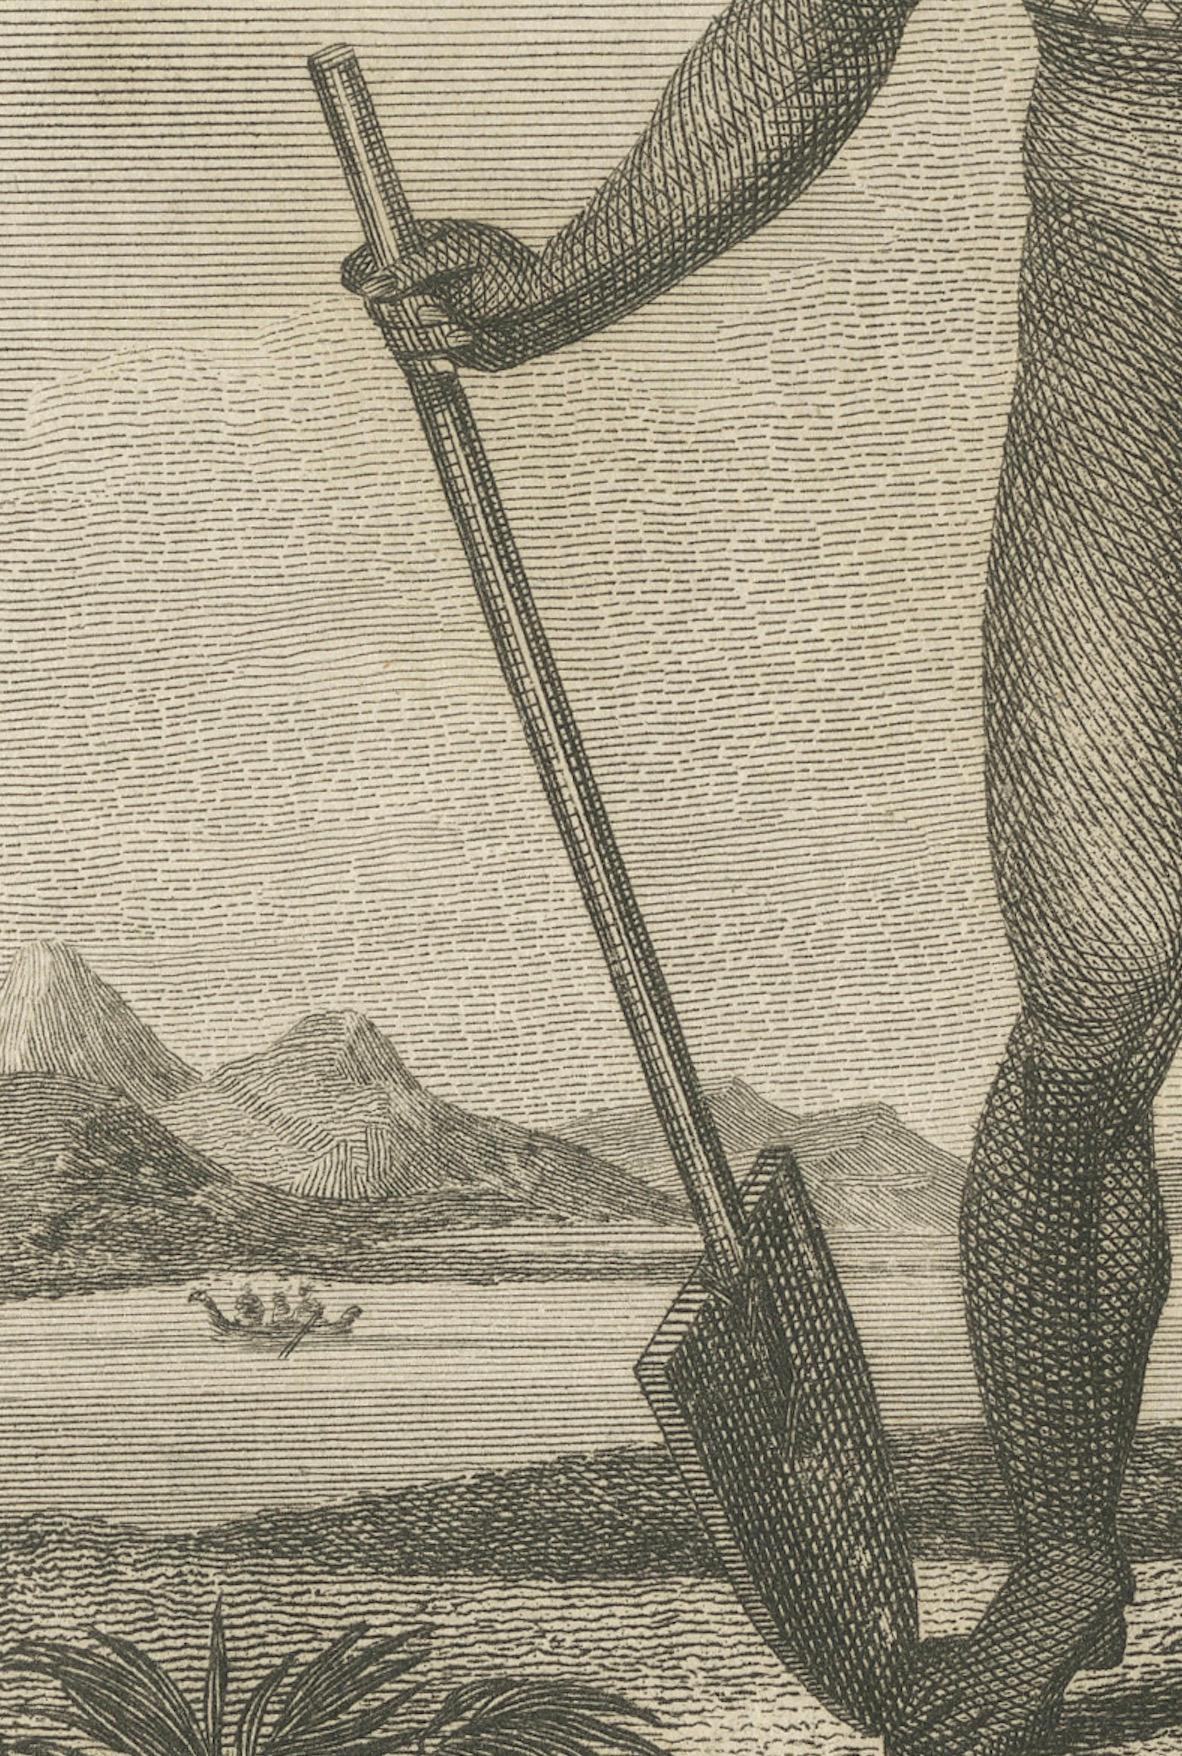 Engraved Engraving of A Savage of the Admiralty Isles in the Bismarck Archipelago, 1801 For Sale